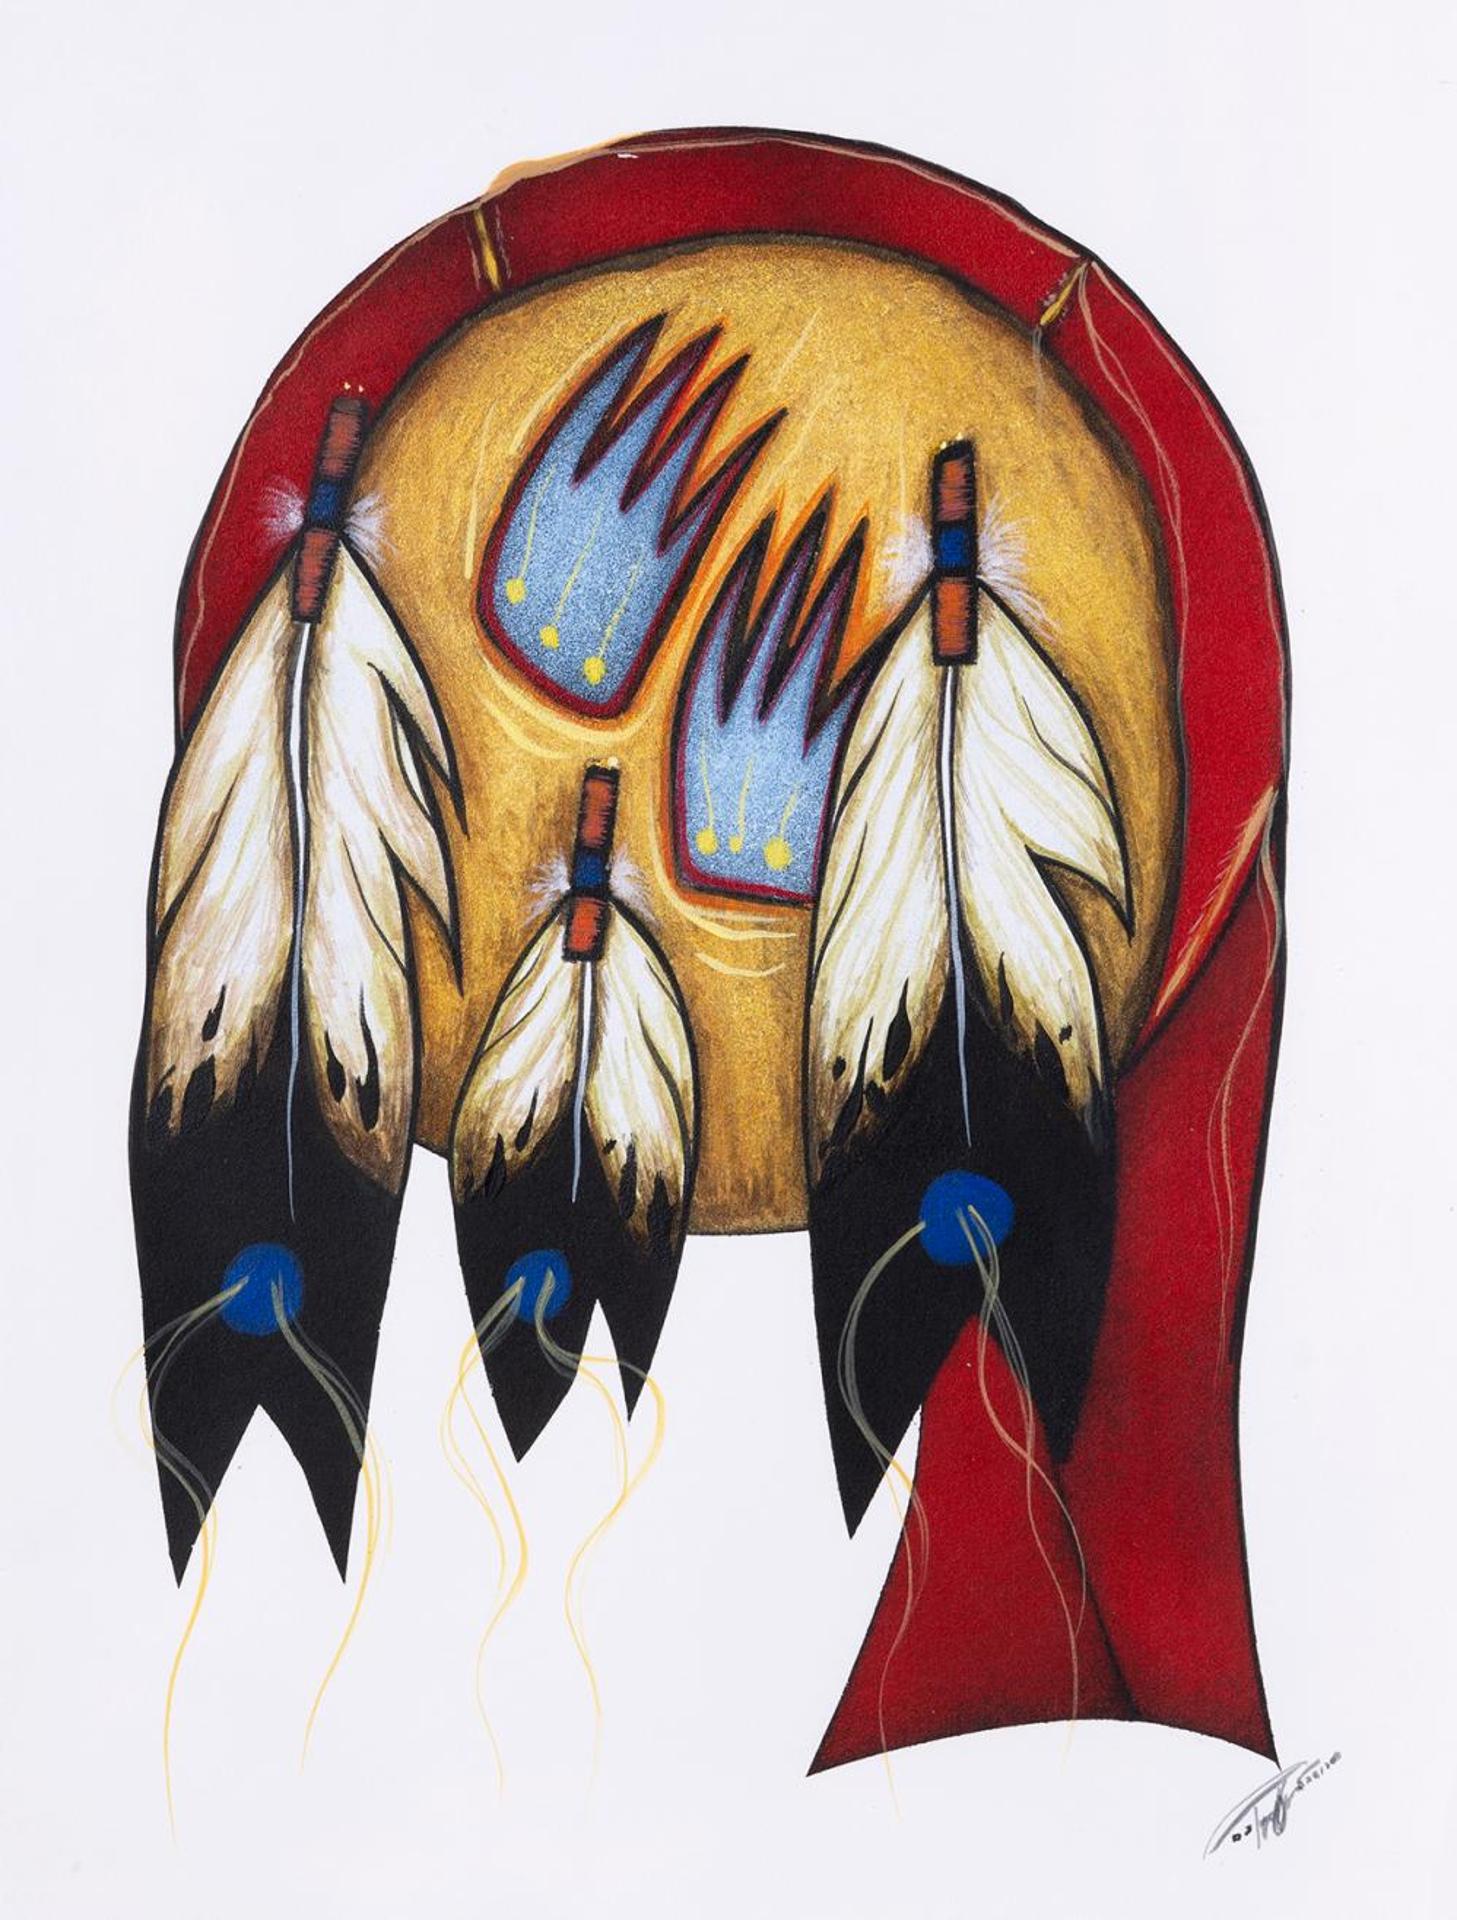 D.J. Tapaquon (1977) - Untitled - Drum with Three Feathers